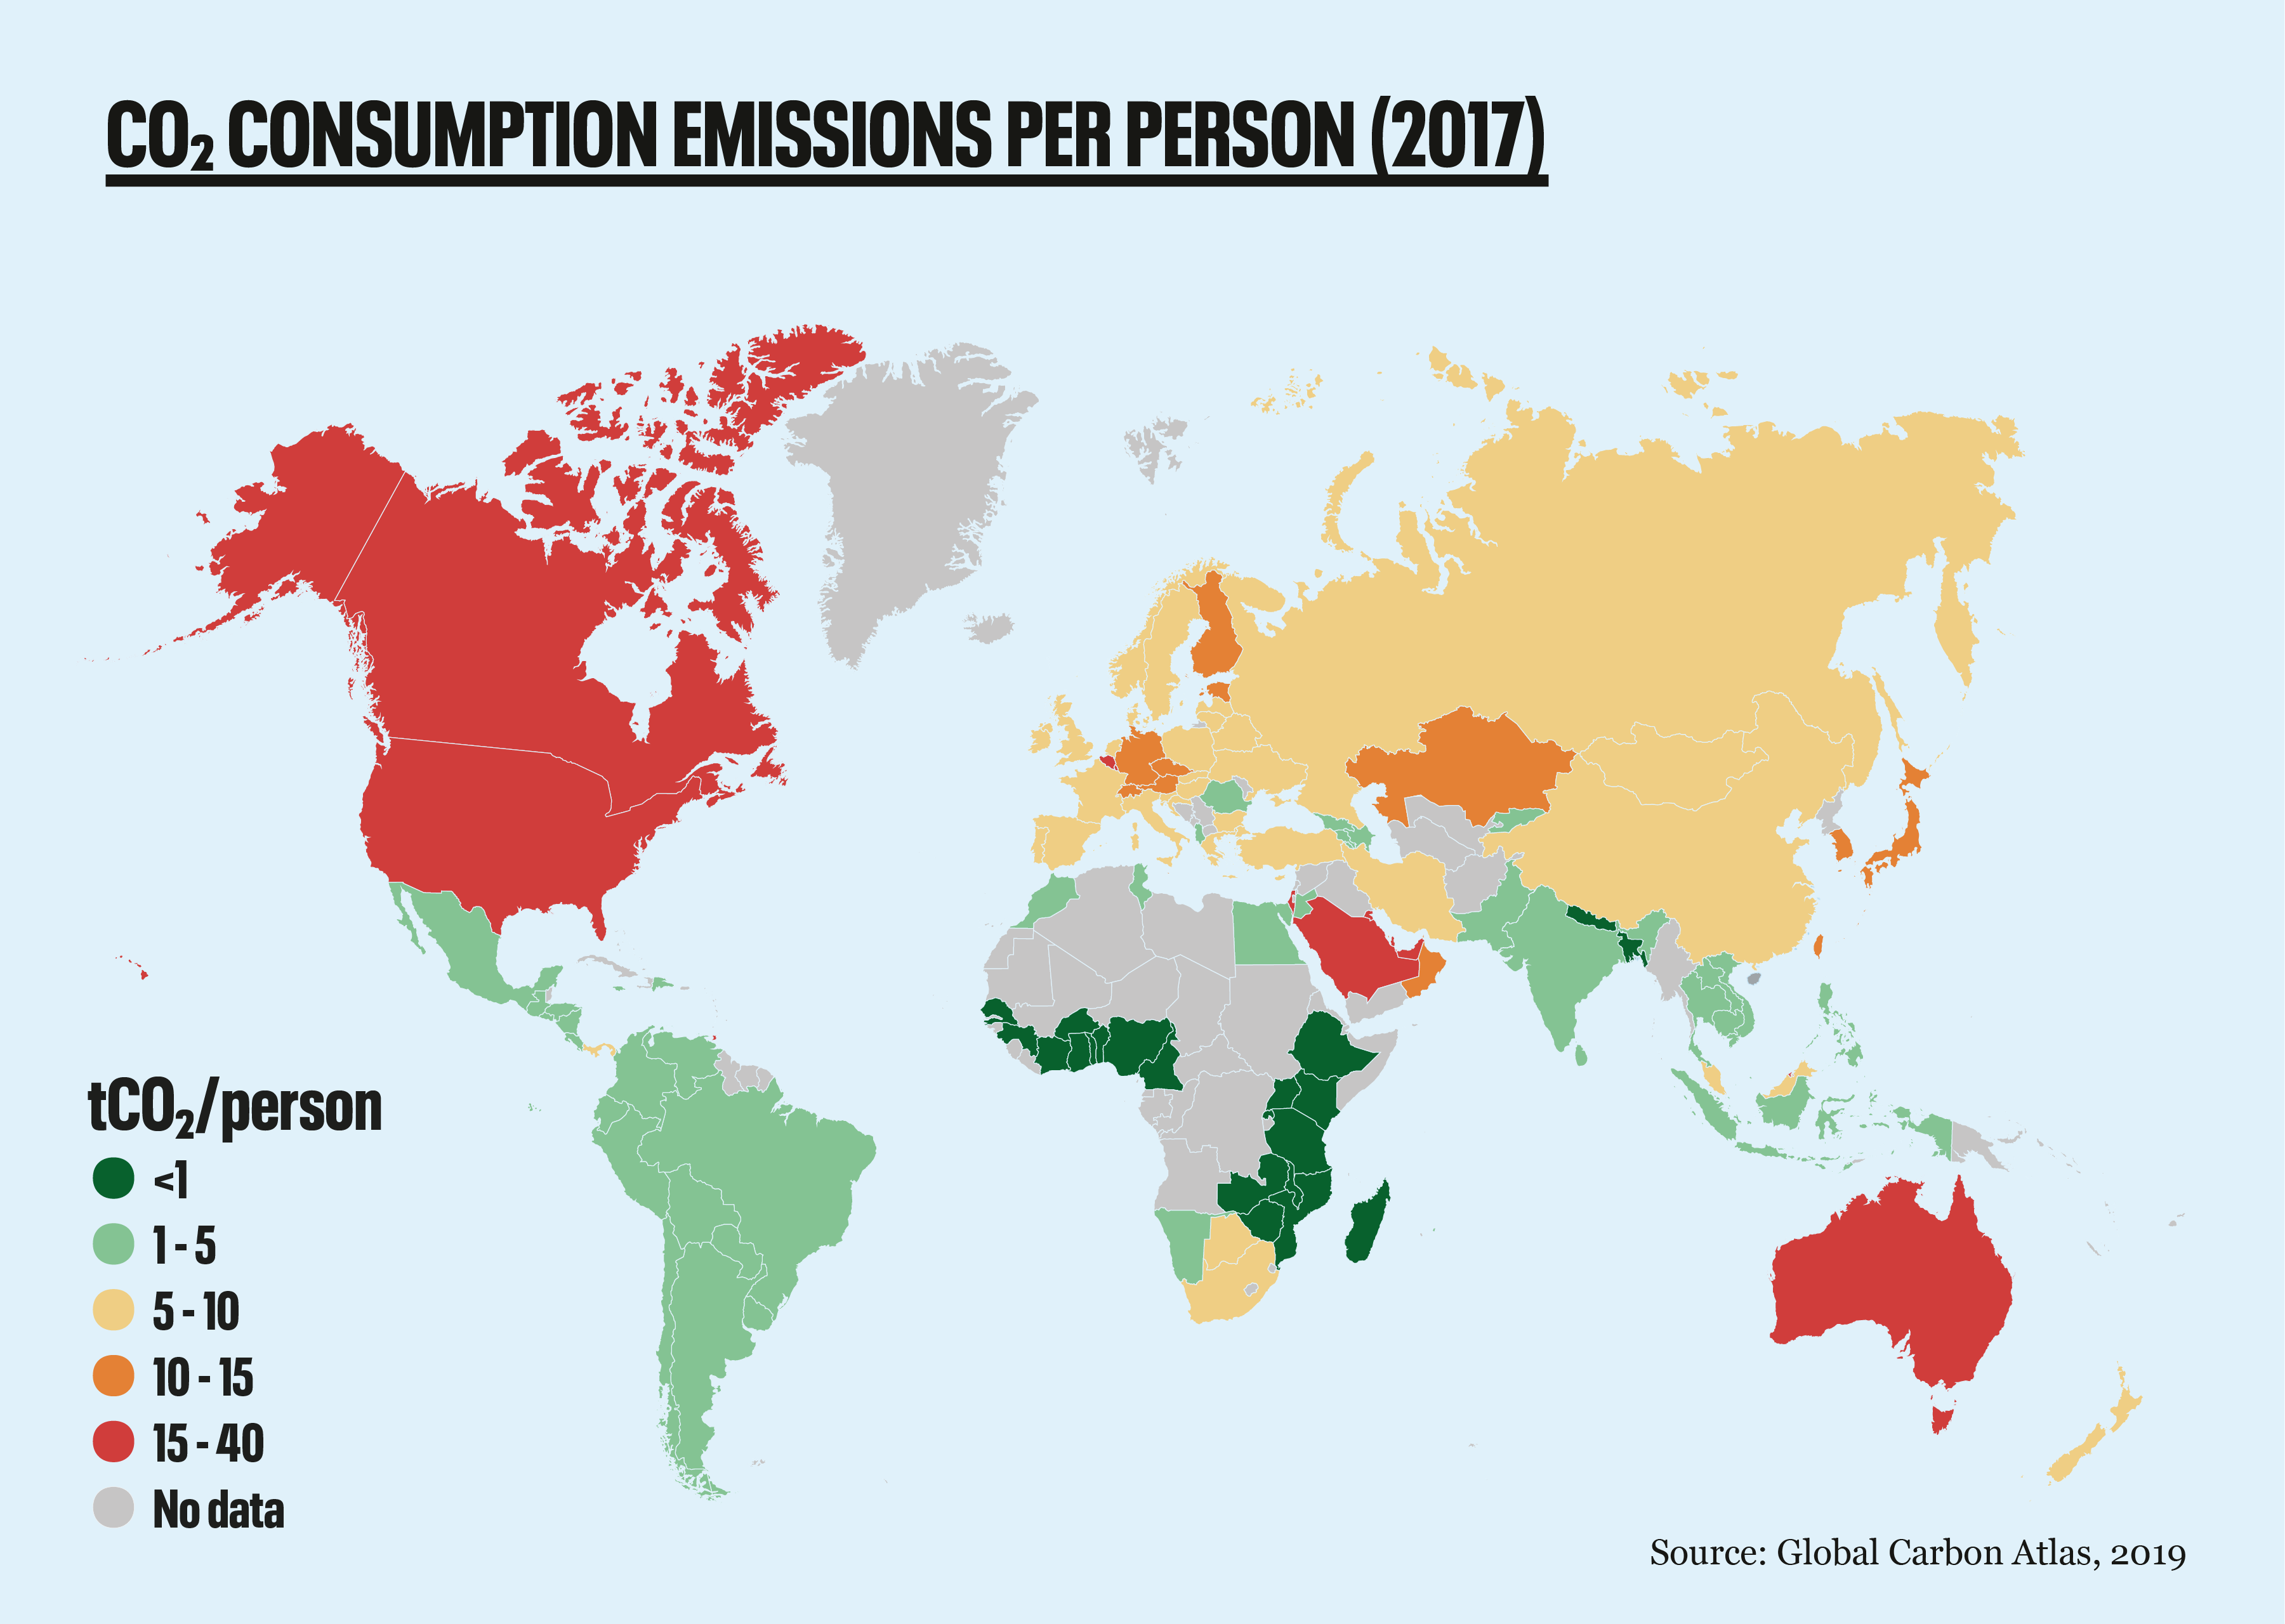 Map of CO2 emissions per person